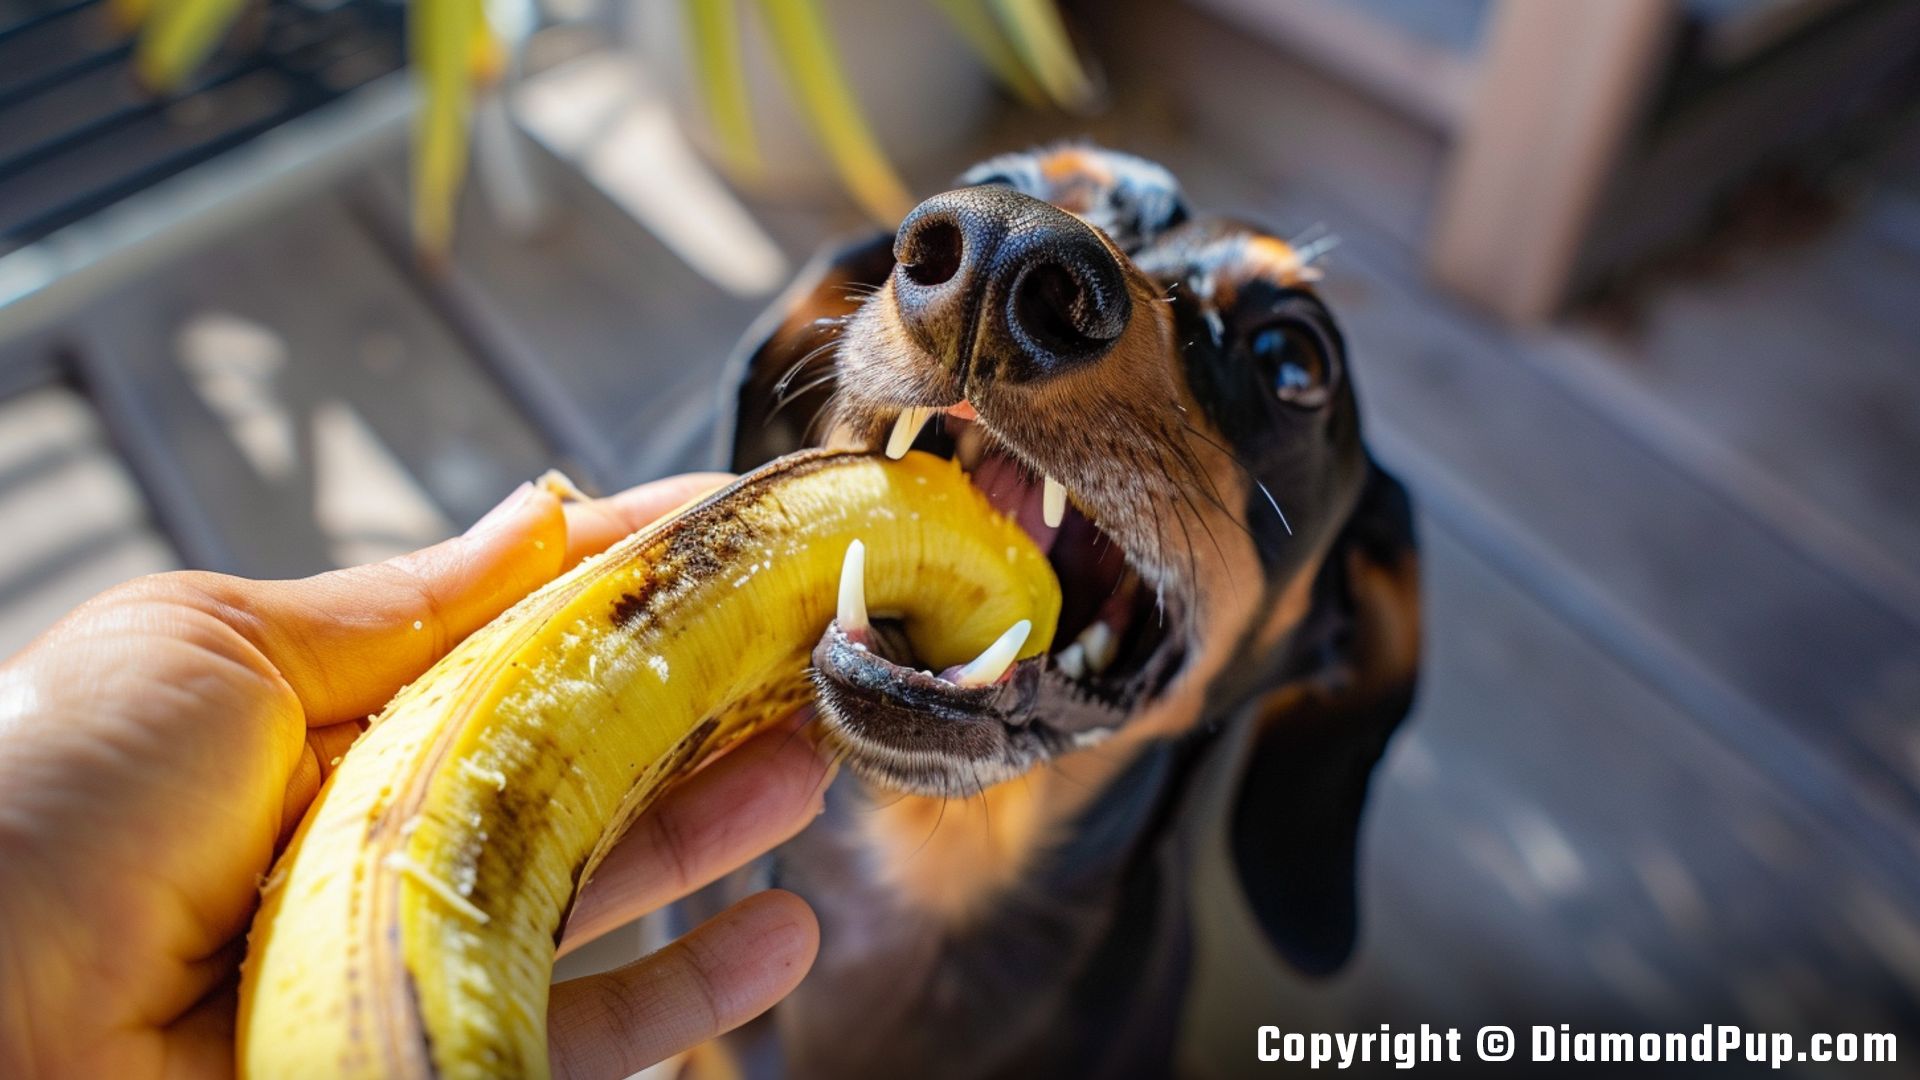 Picture of a Playful Dachshund Snacking on Banana